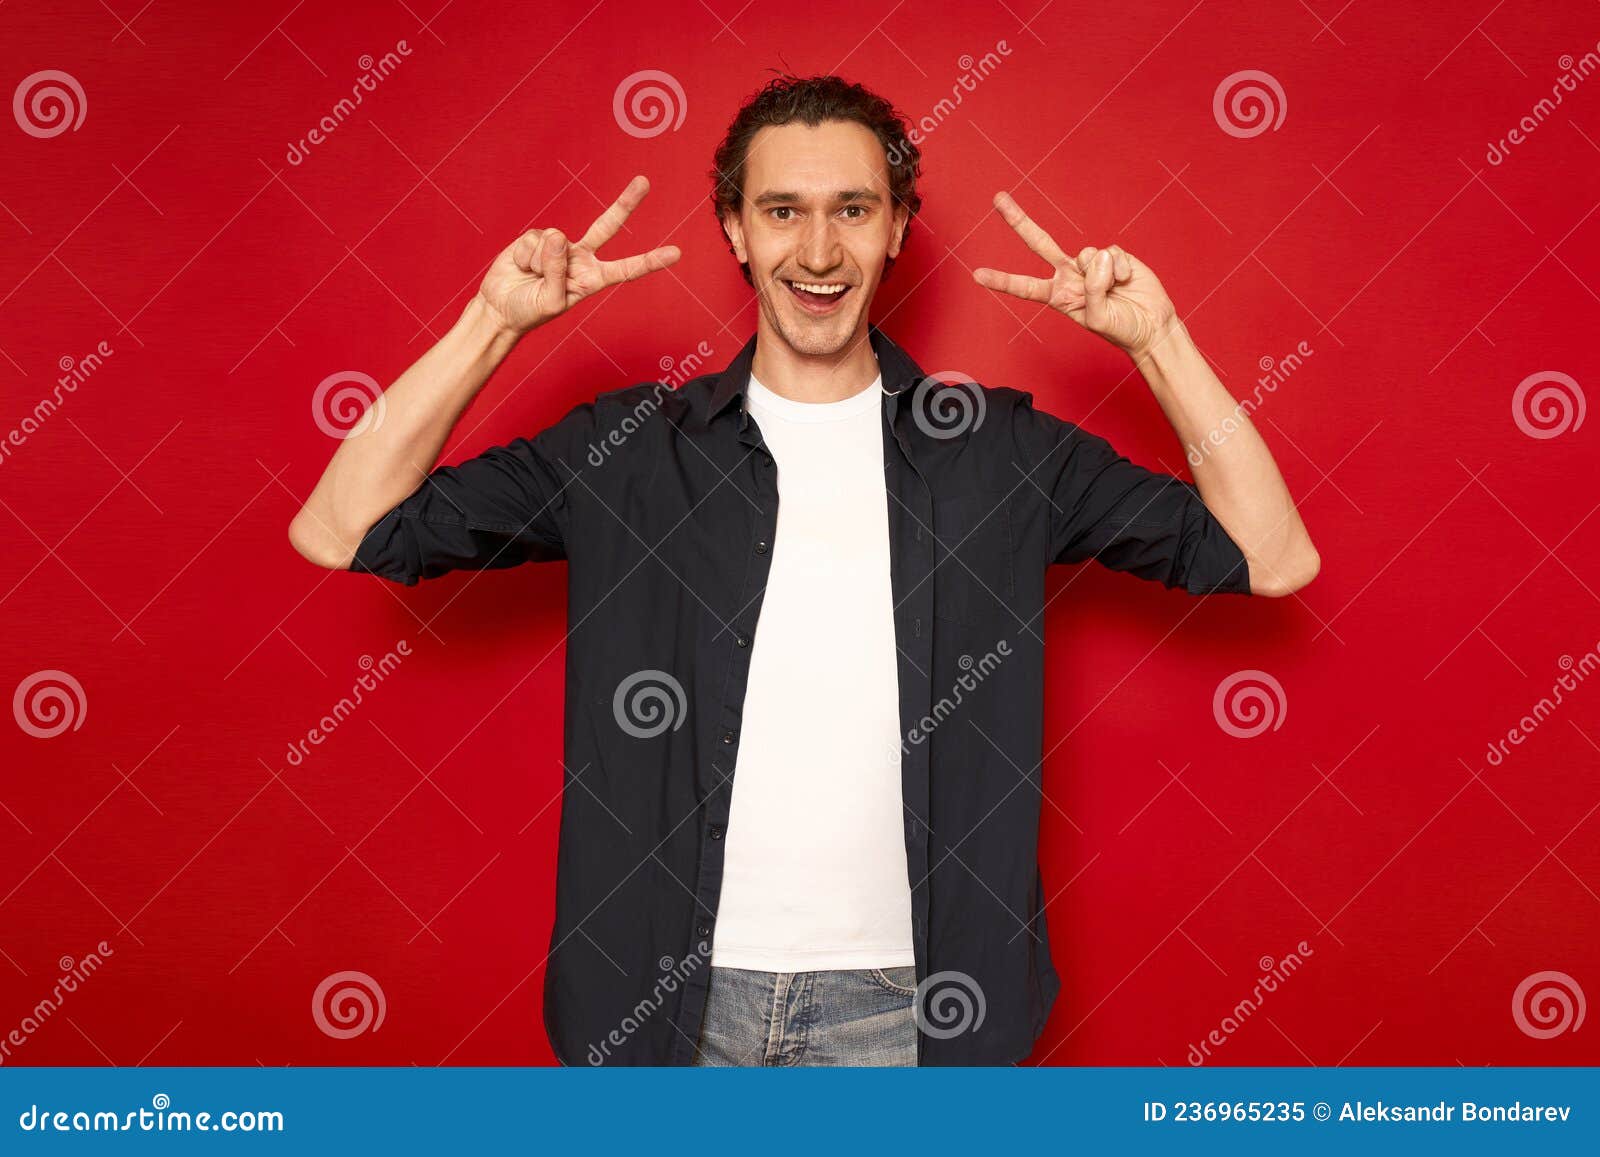 portrait of attractive smiling, childishly mature man dressed in blue shirt with smiling v-d signs highlighted in